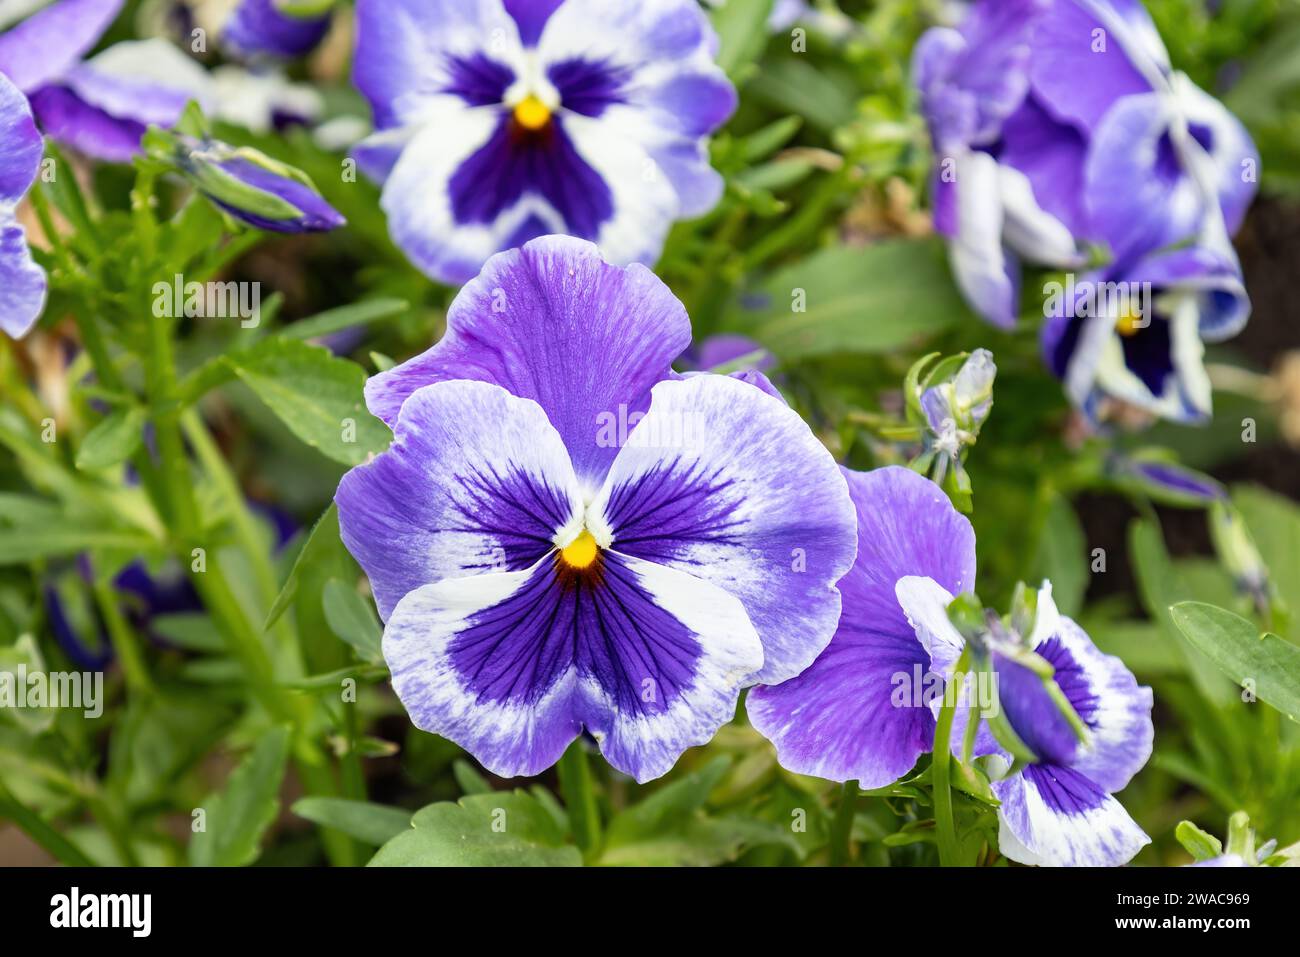 A garden pansy (Viola × wittrockiana), a type of polychromatic large-flowered hybrid plant cultivated as a garden flower Stock Photo